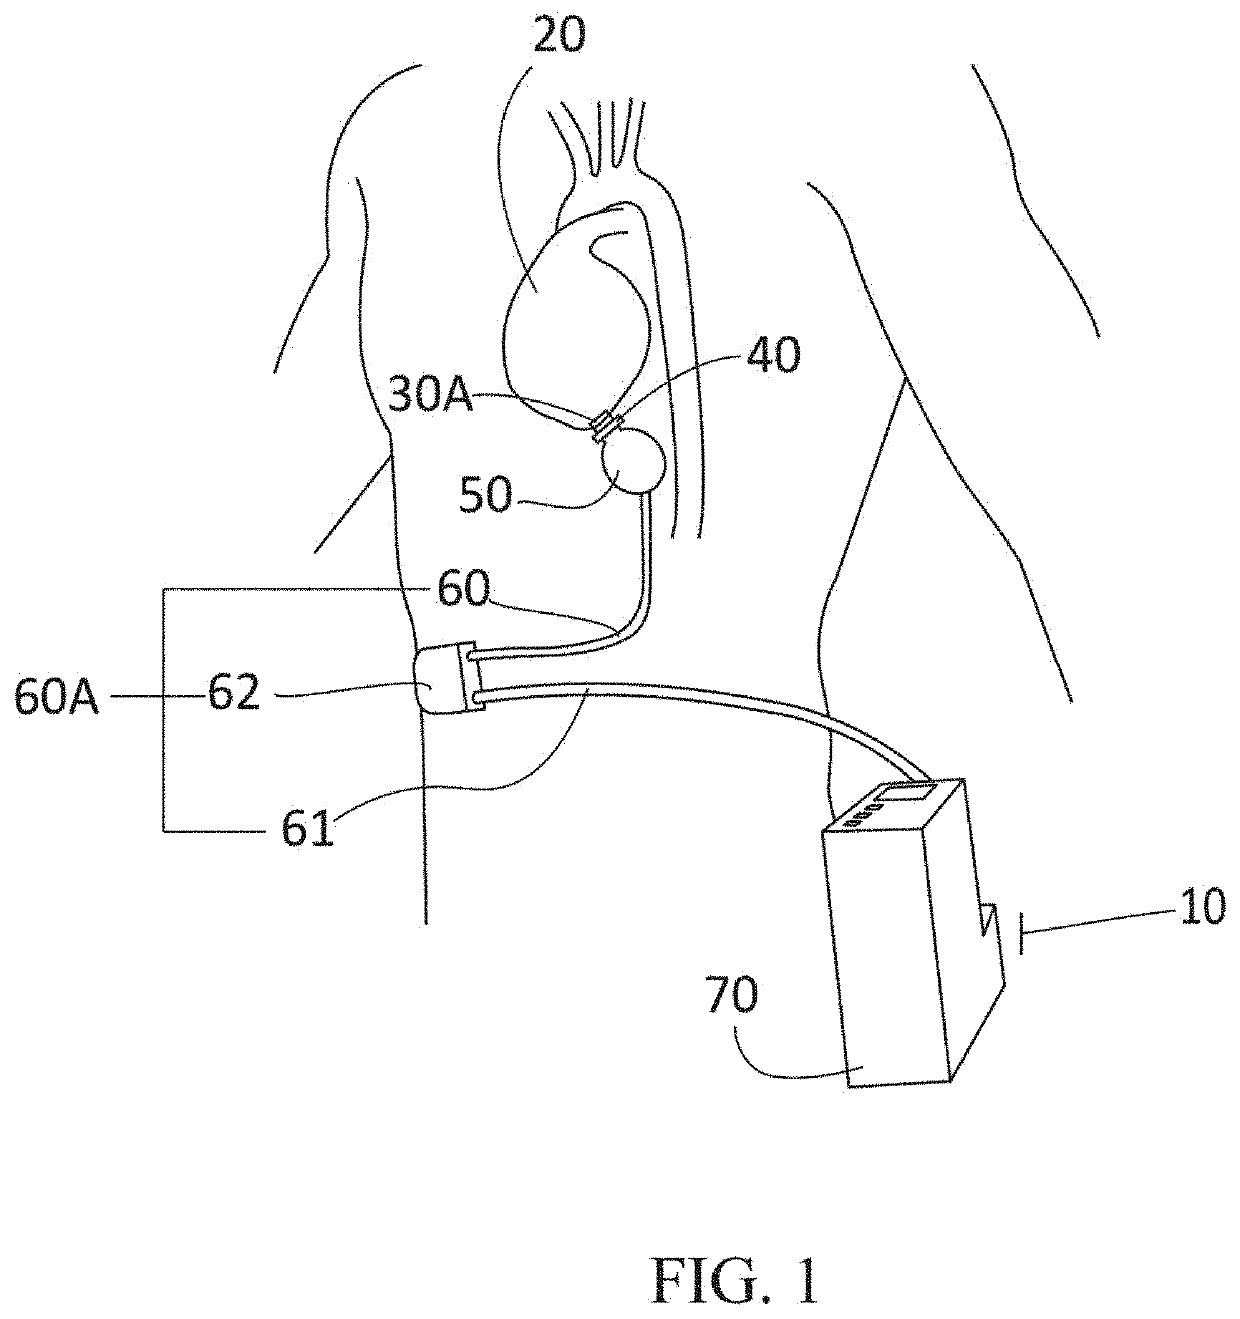 Implantable co-pulsatile epi-ventricular circulatory support system with sutureless flow cannula assembly